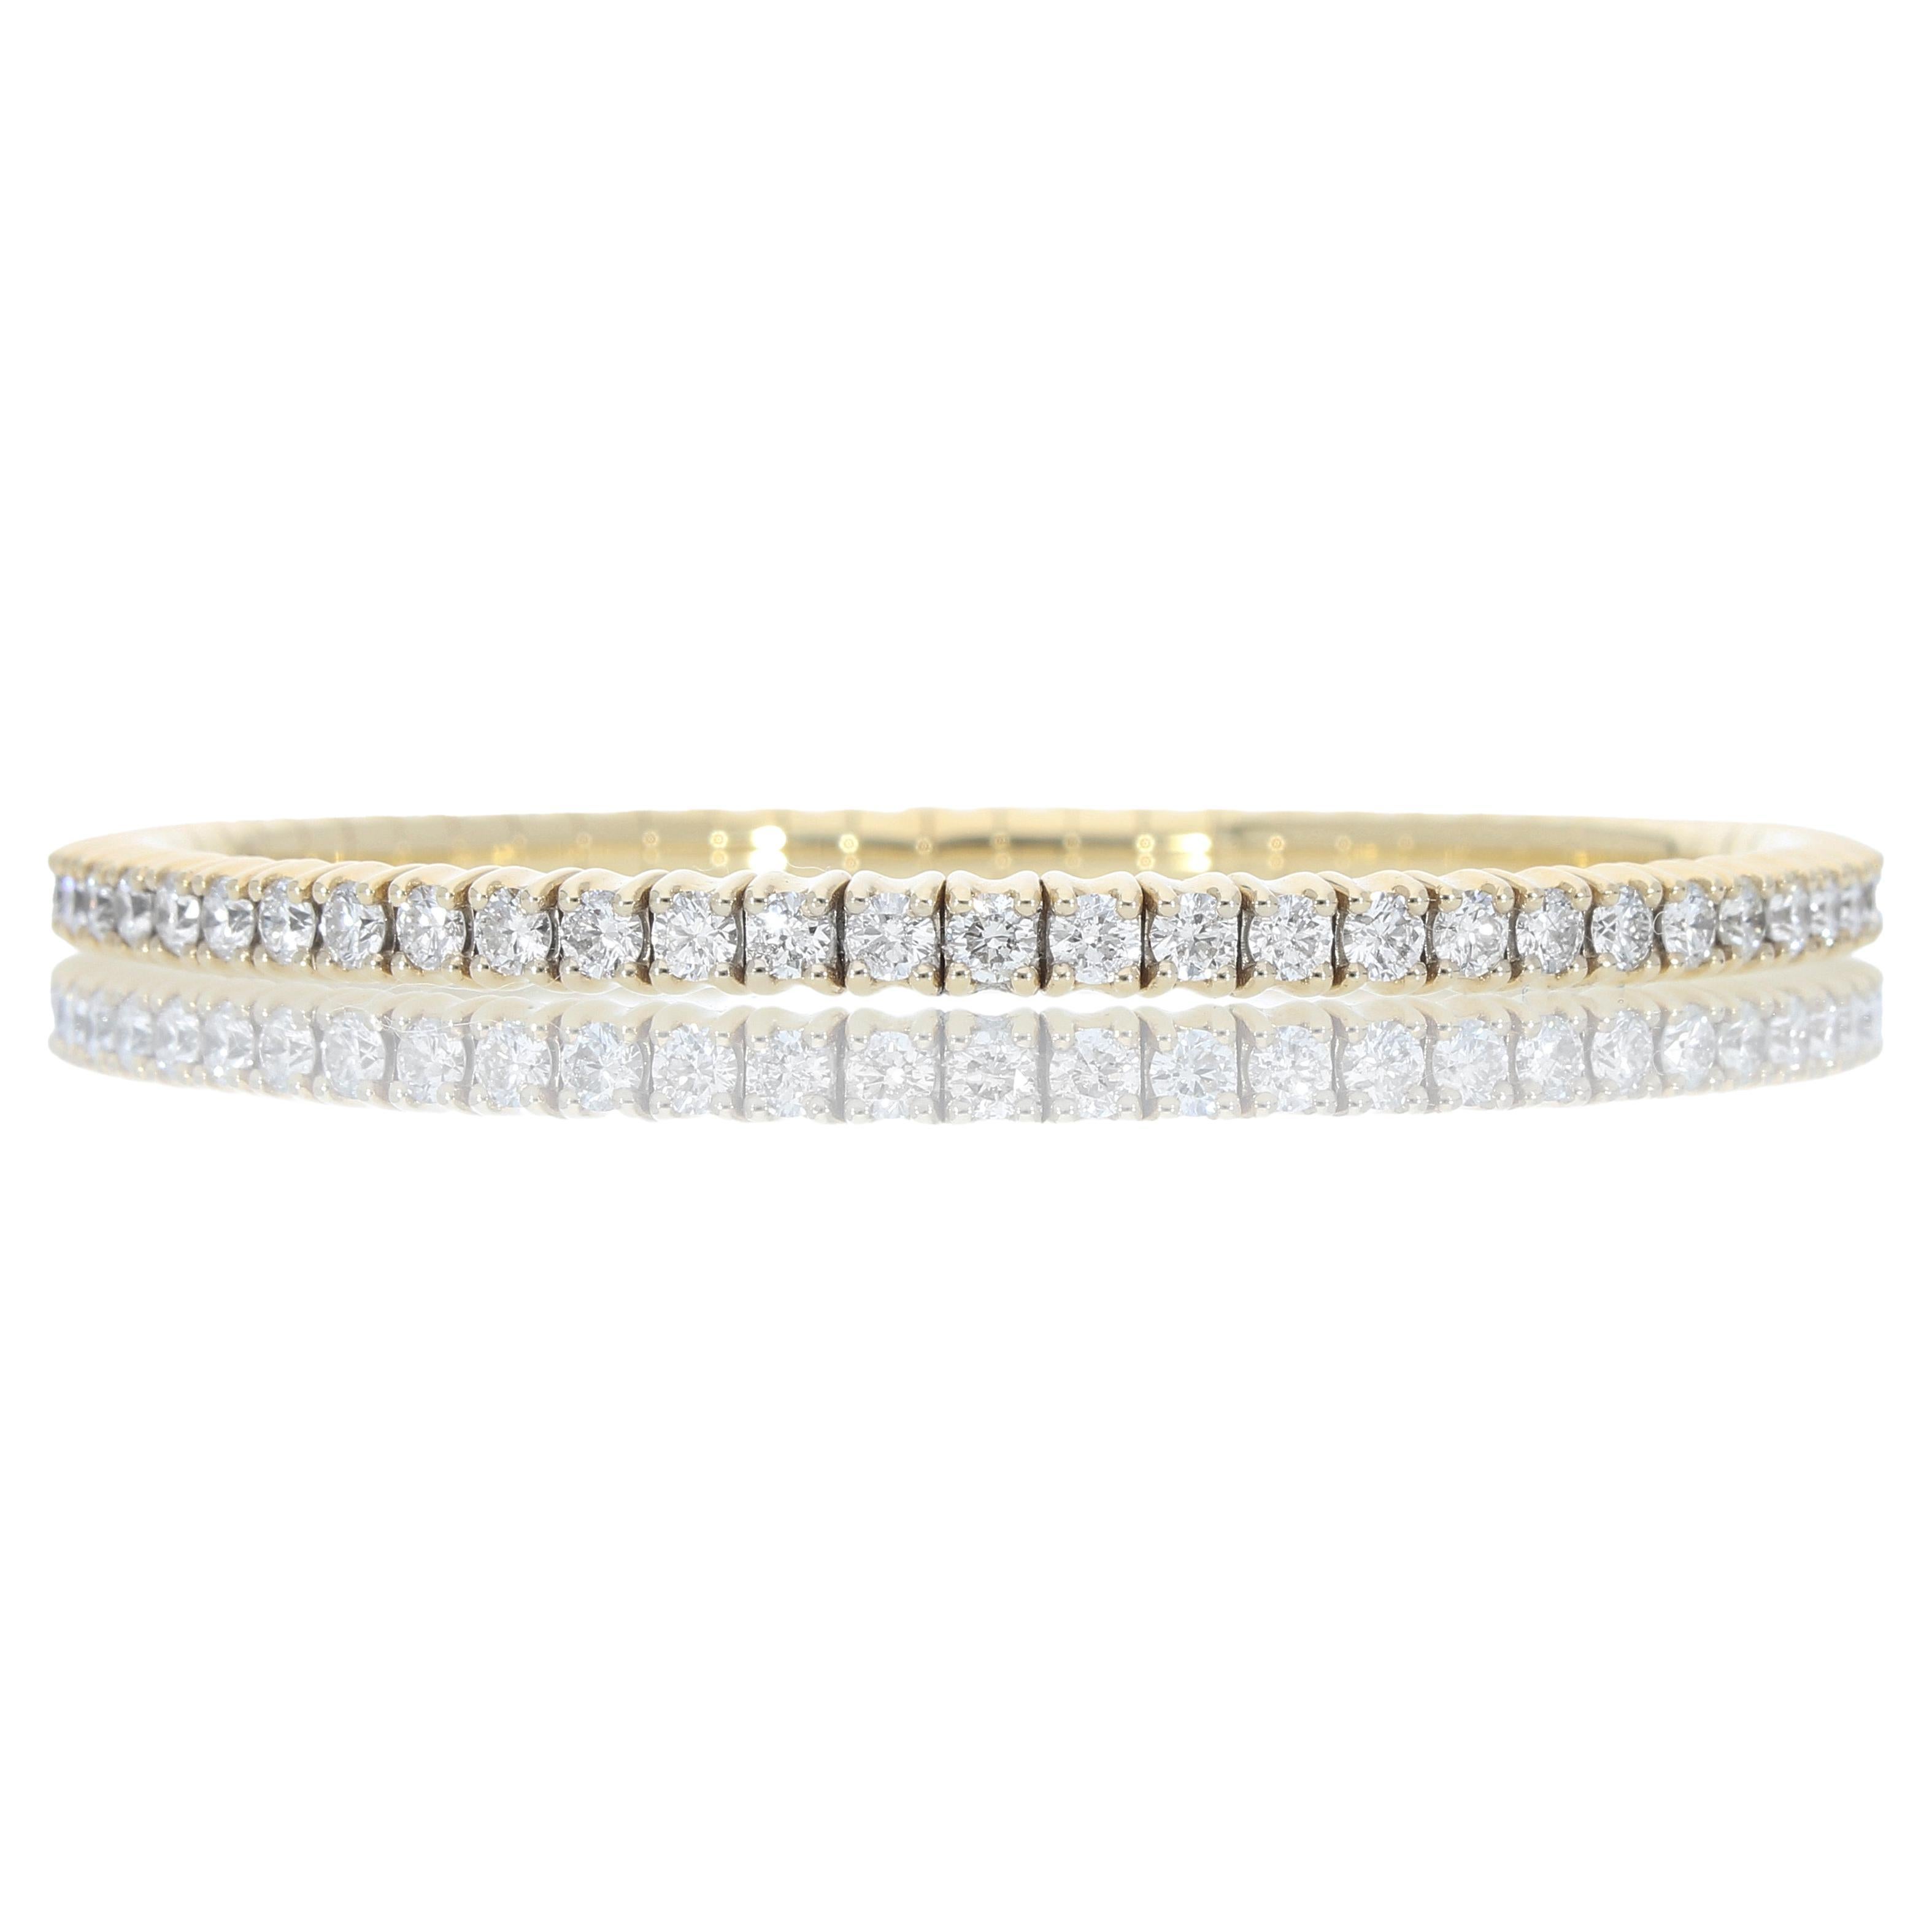 Carat 4.30 Elastic Diamond Tennis Bracelet. Yellow Gold 18 Kt. Made in Italy. For Sale